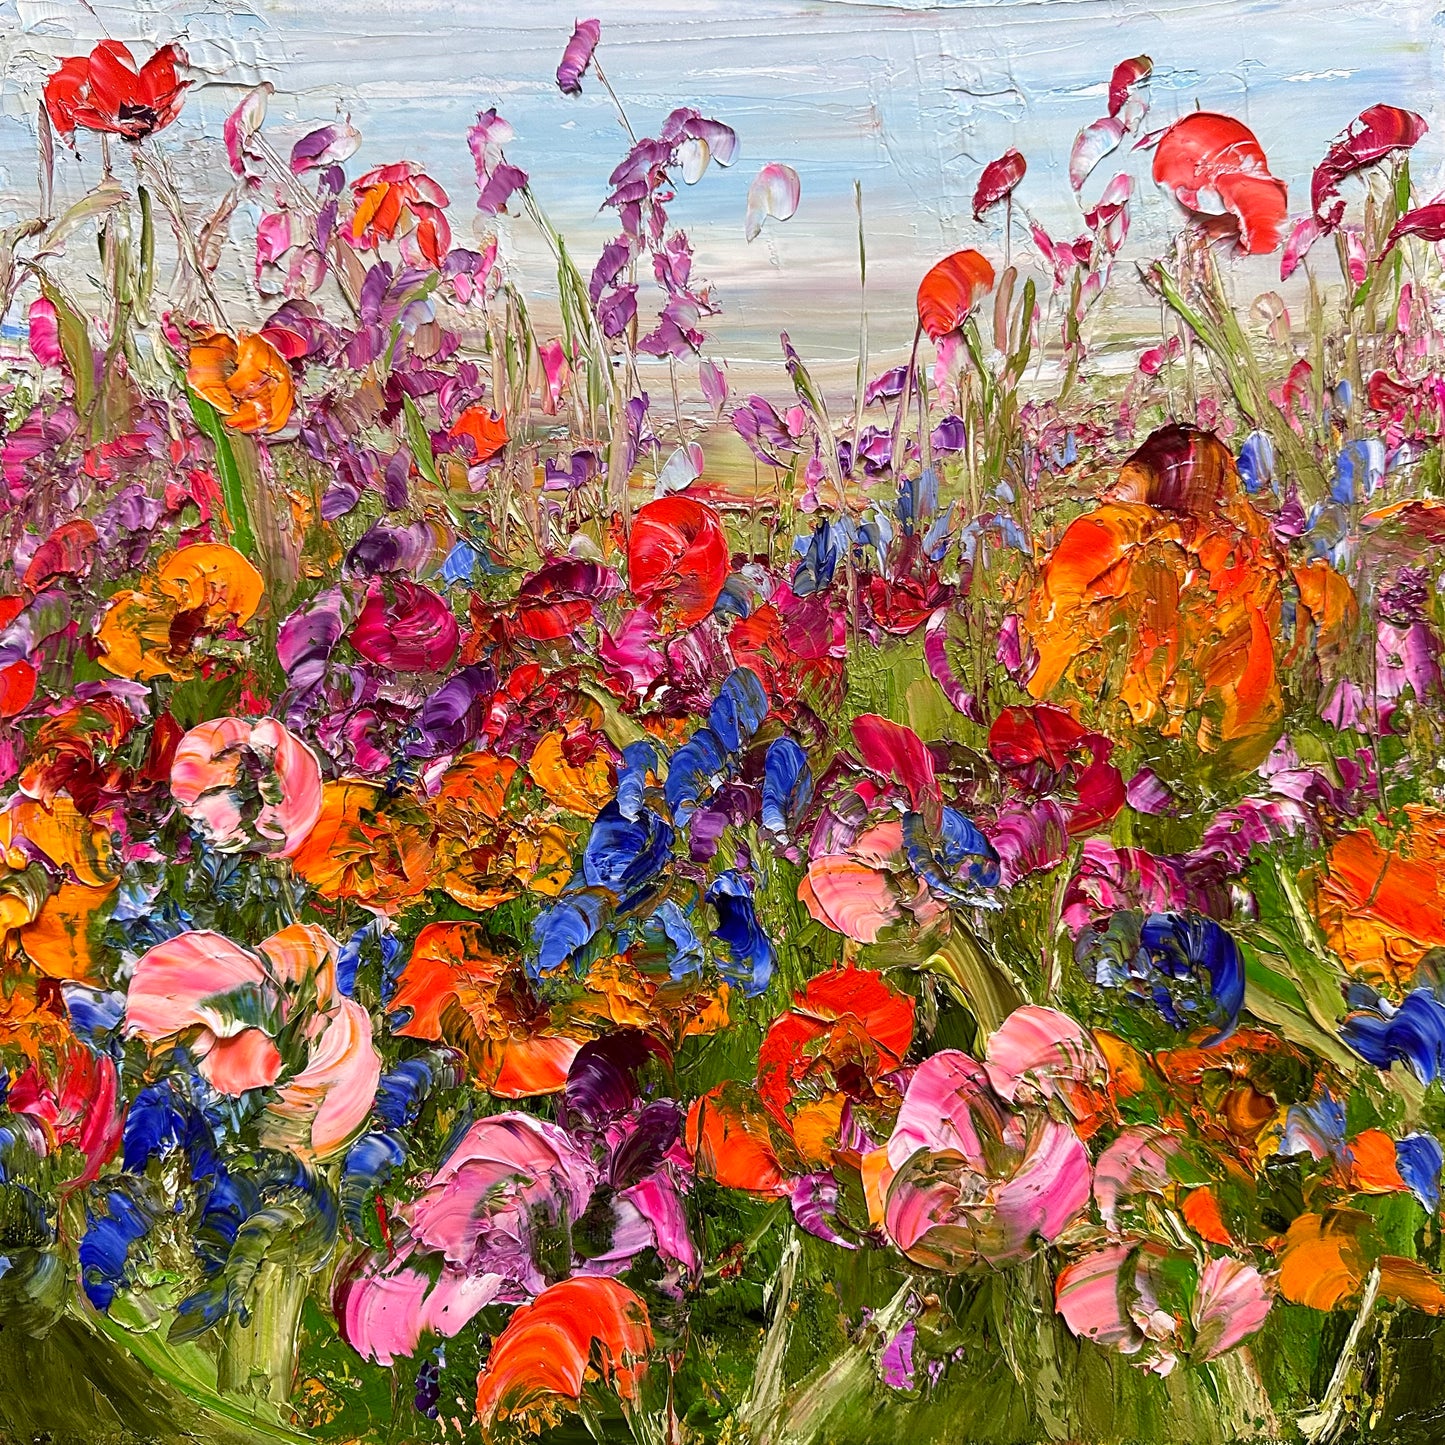 Abstract impressionist oil painting of wild flowers